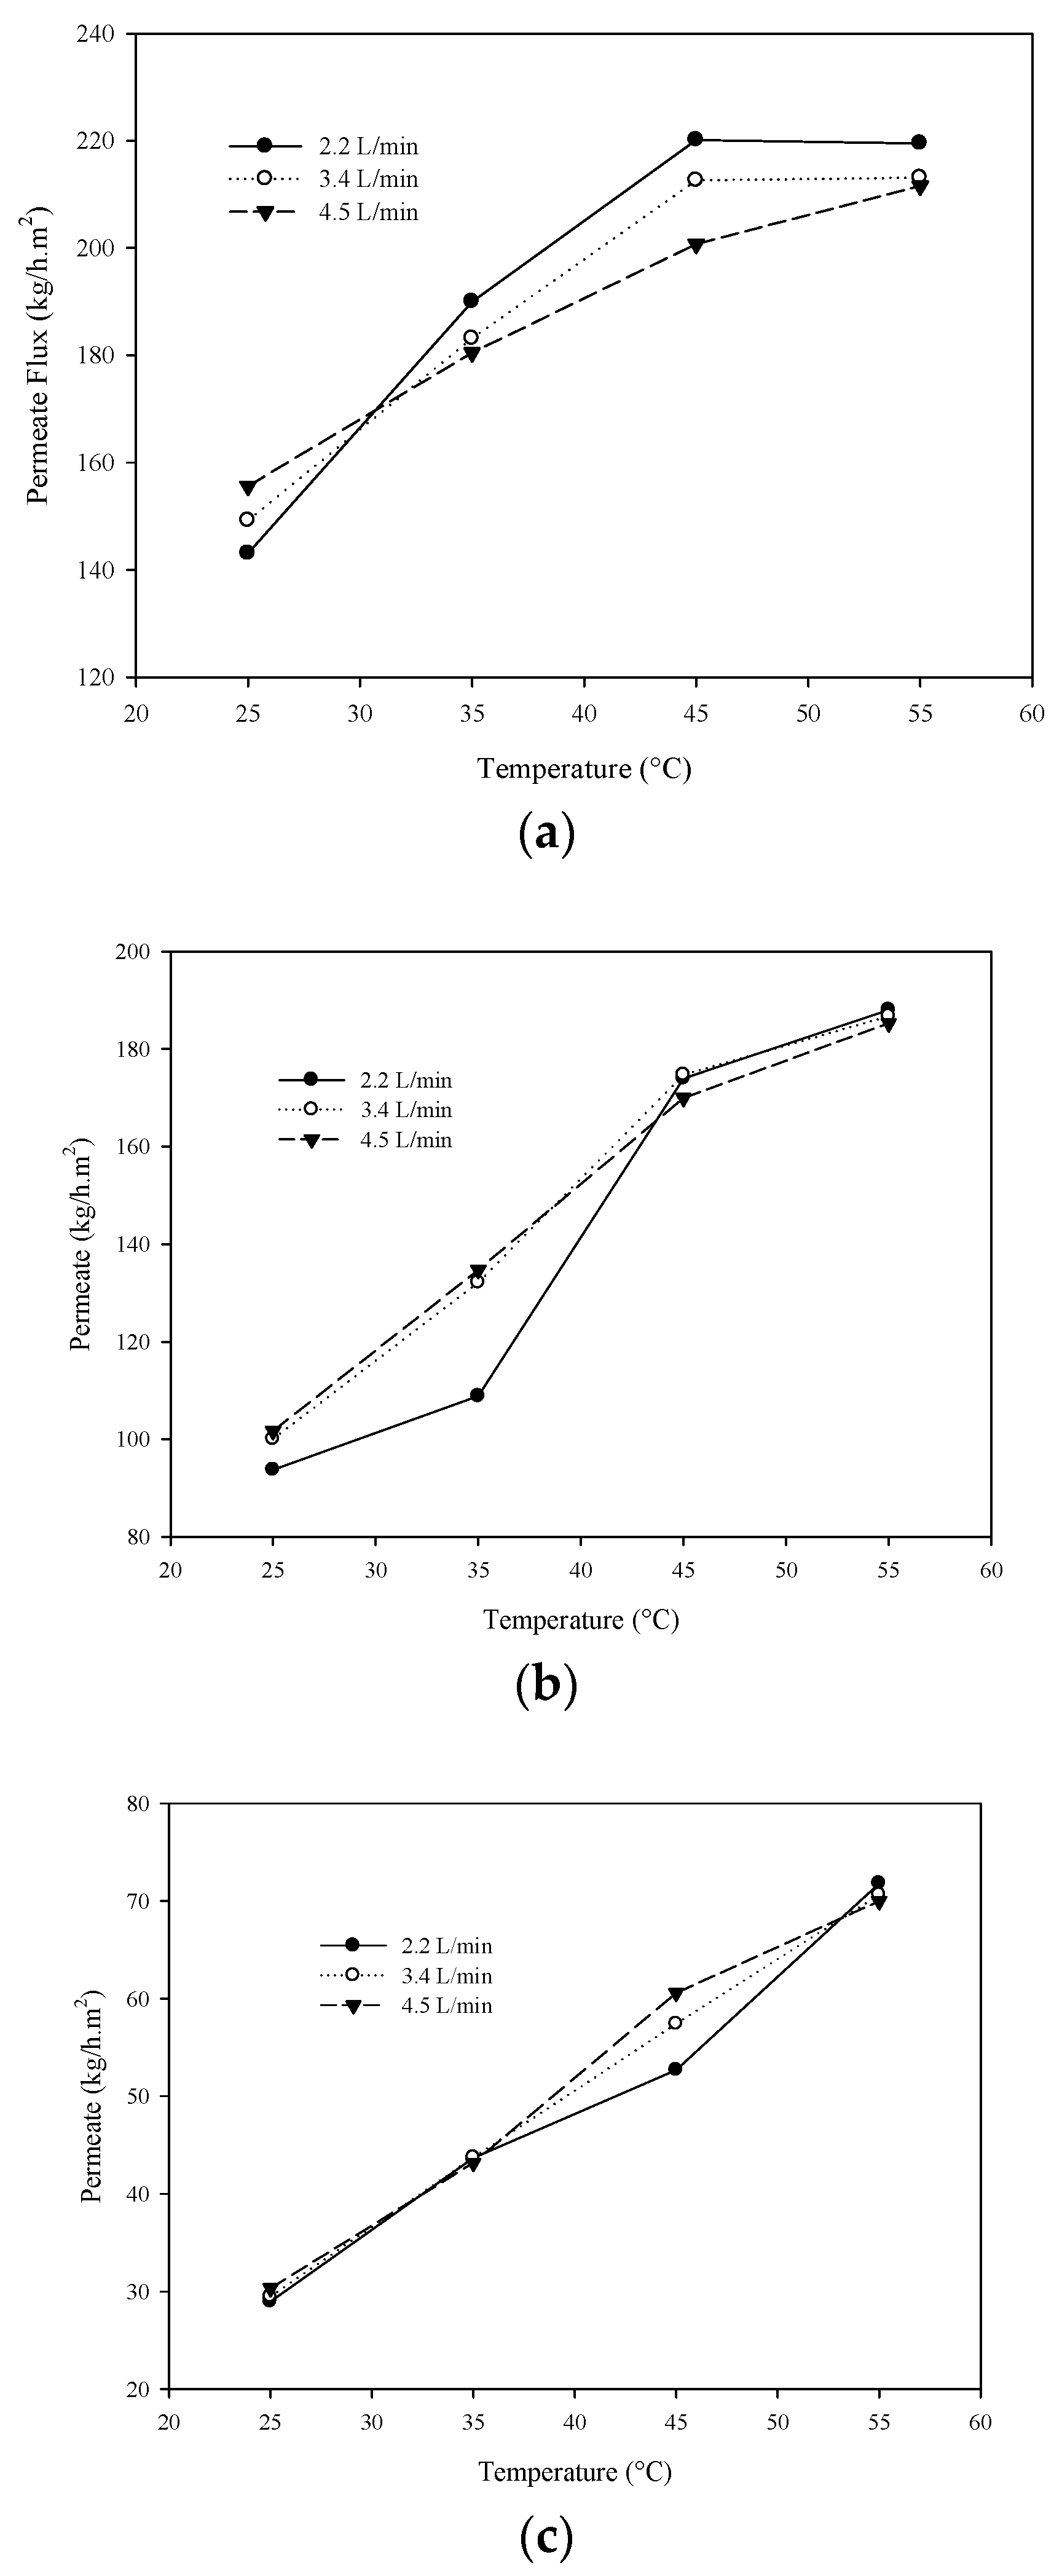 https://pub.mdpi-res.com/water/water-14-00044/article_deploy/html/images/water-14-00044-g005.png?1640584916